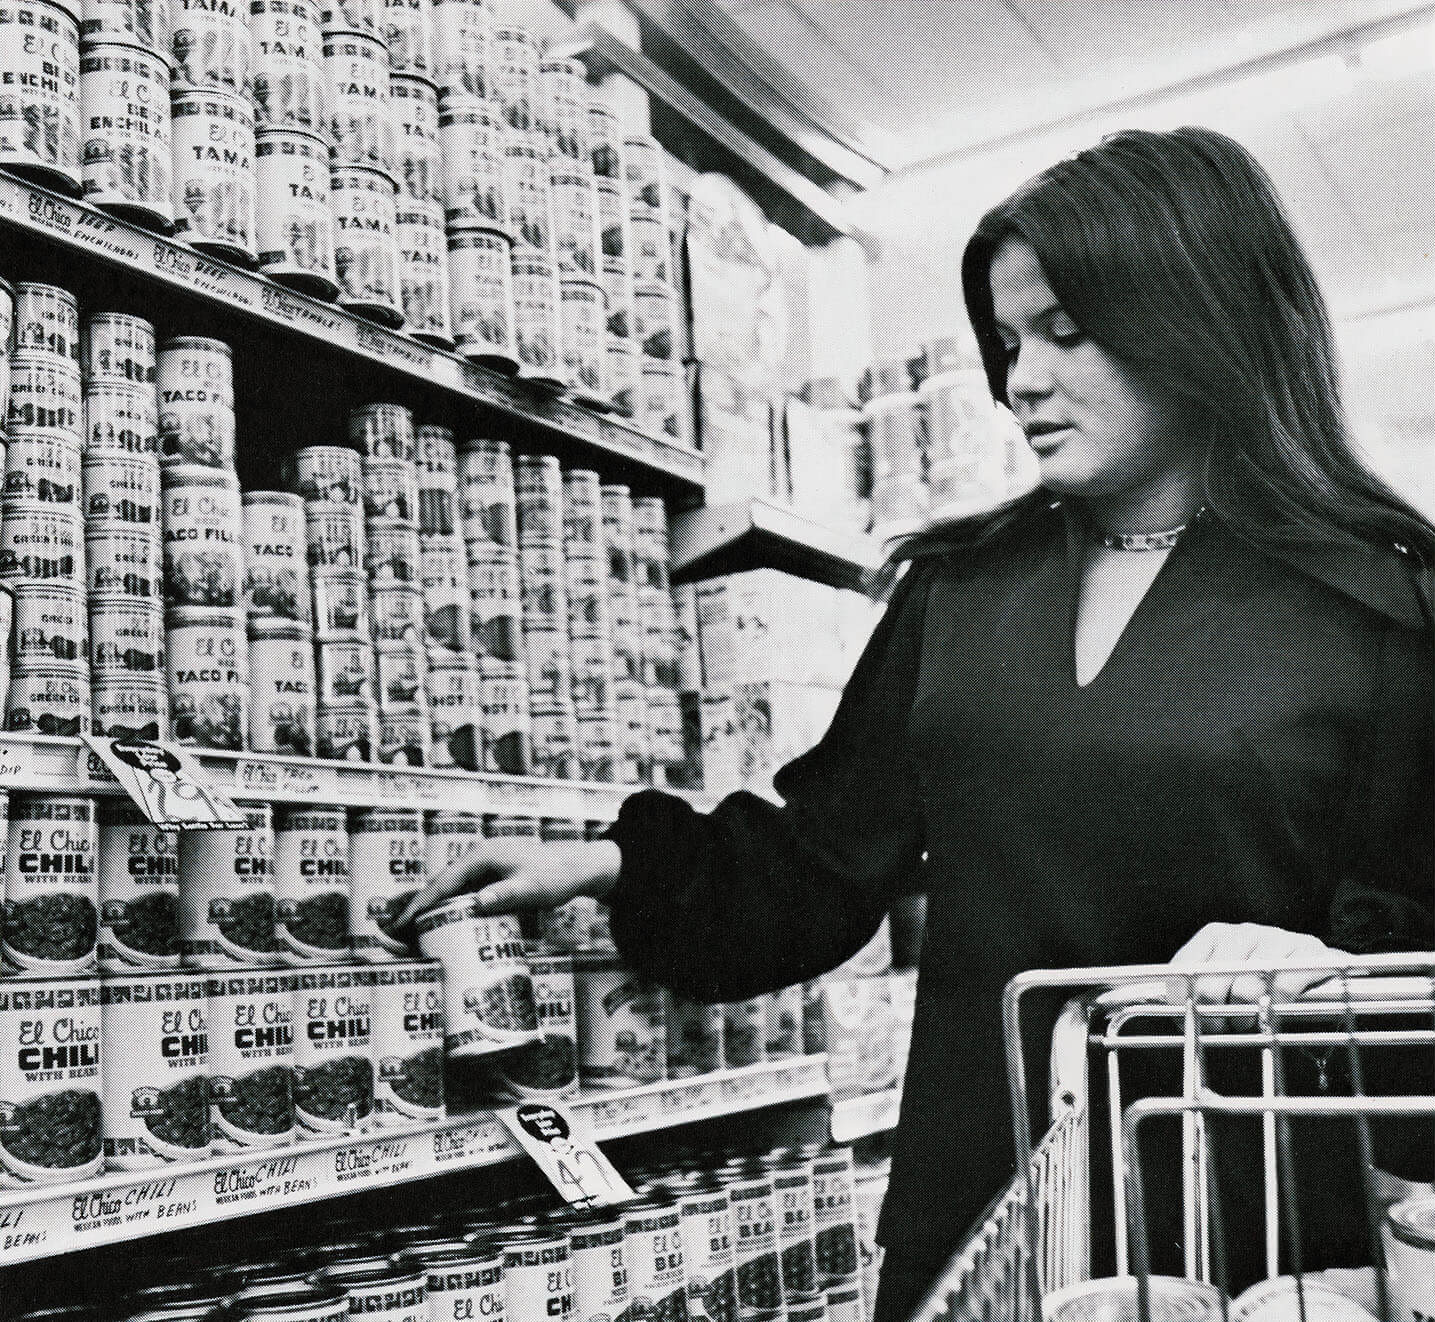 A black and white historic picture of a woman shopping for canned goods